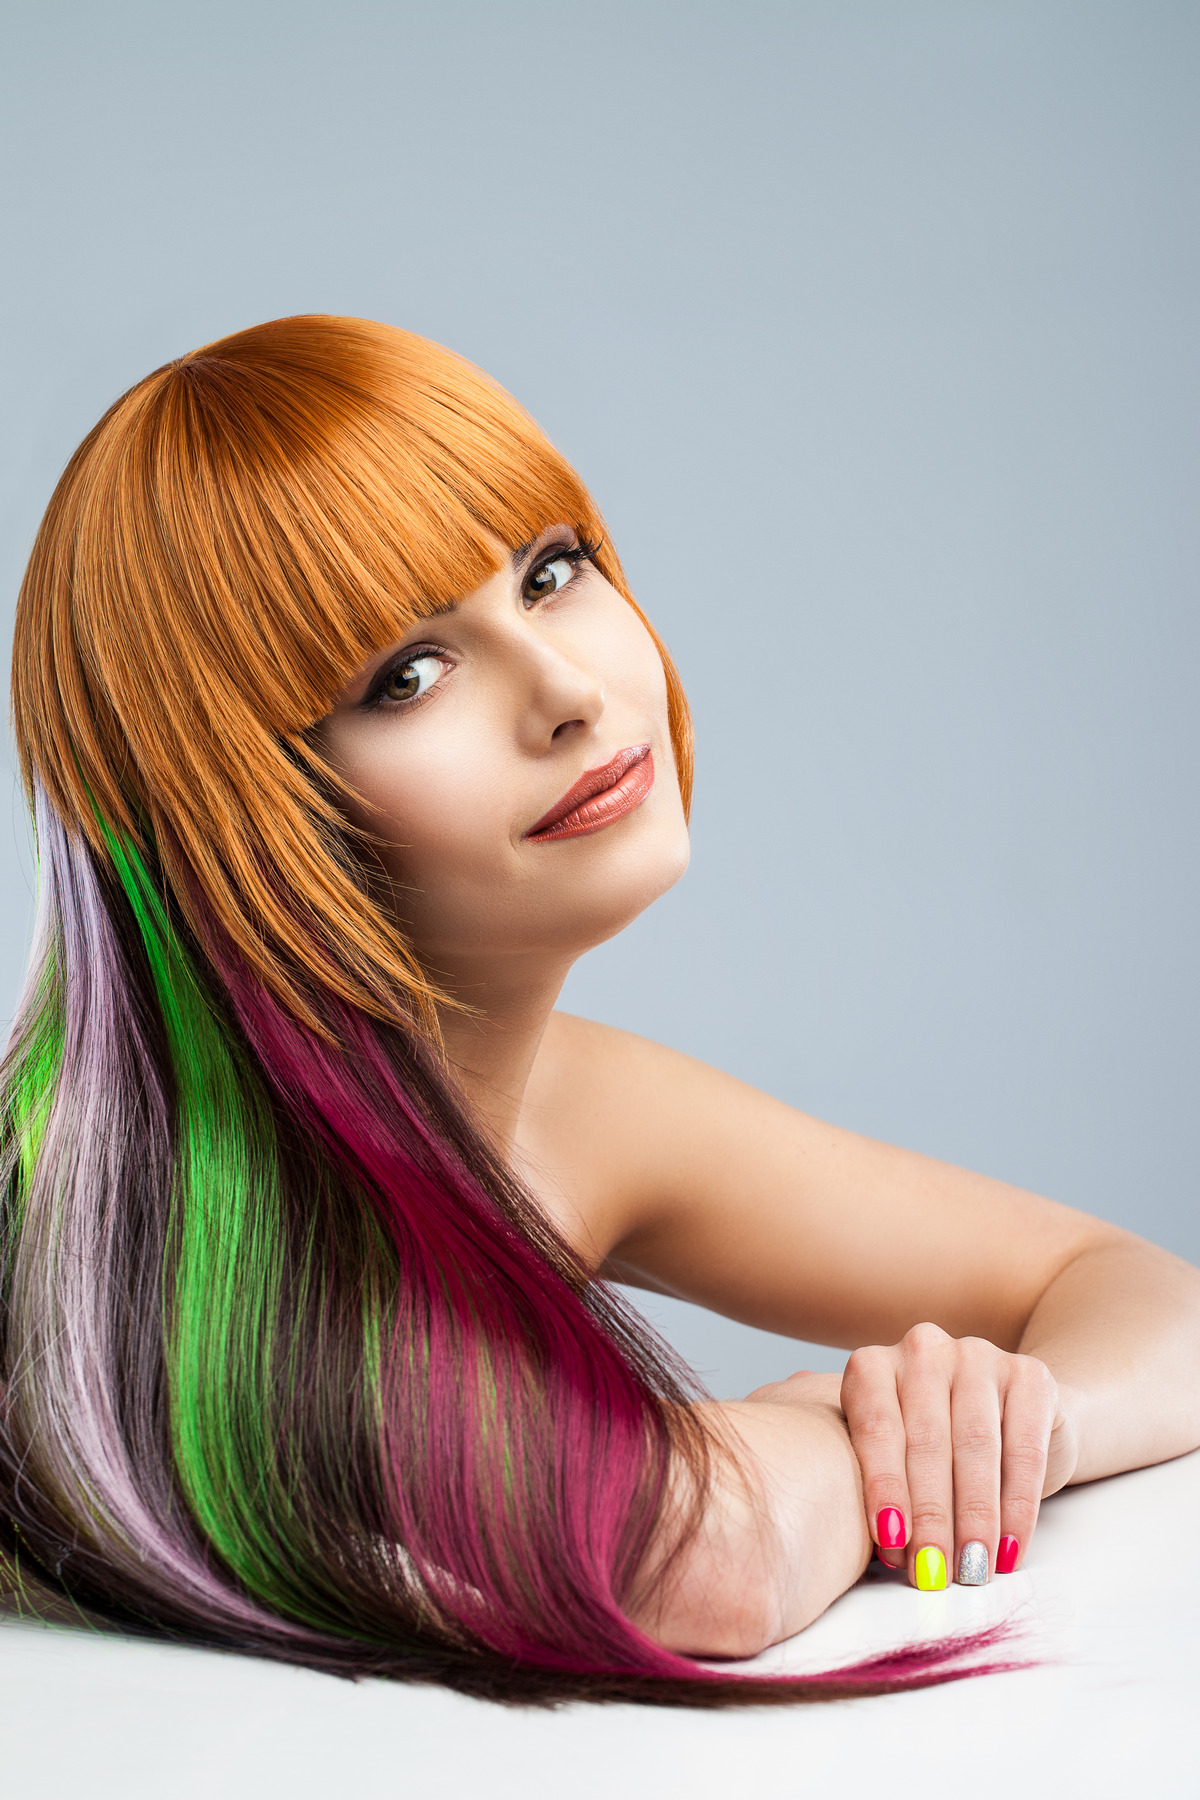 Beautiful woman with creative colored hair